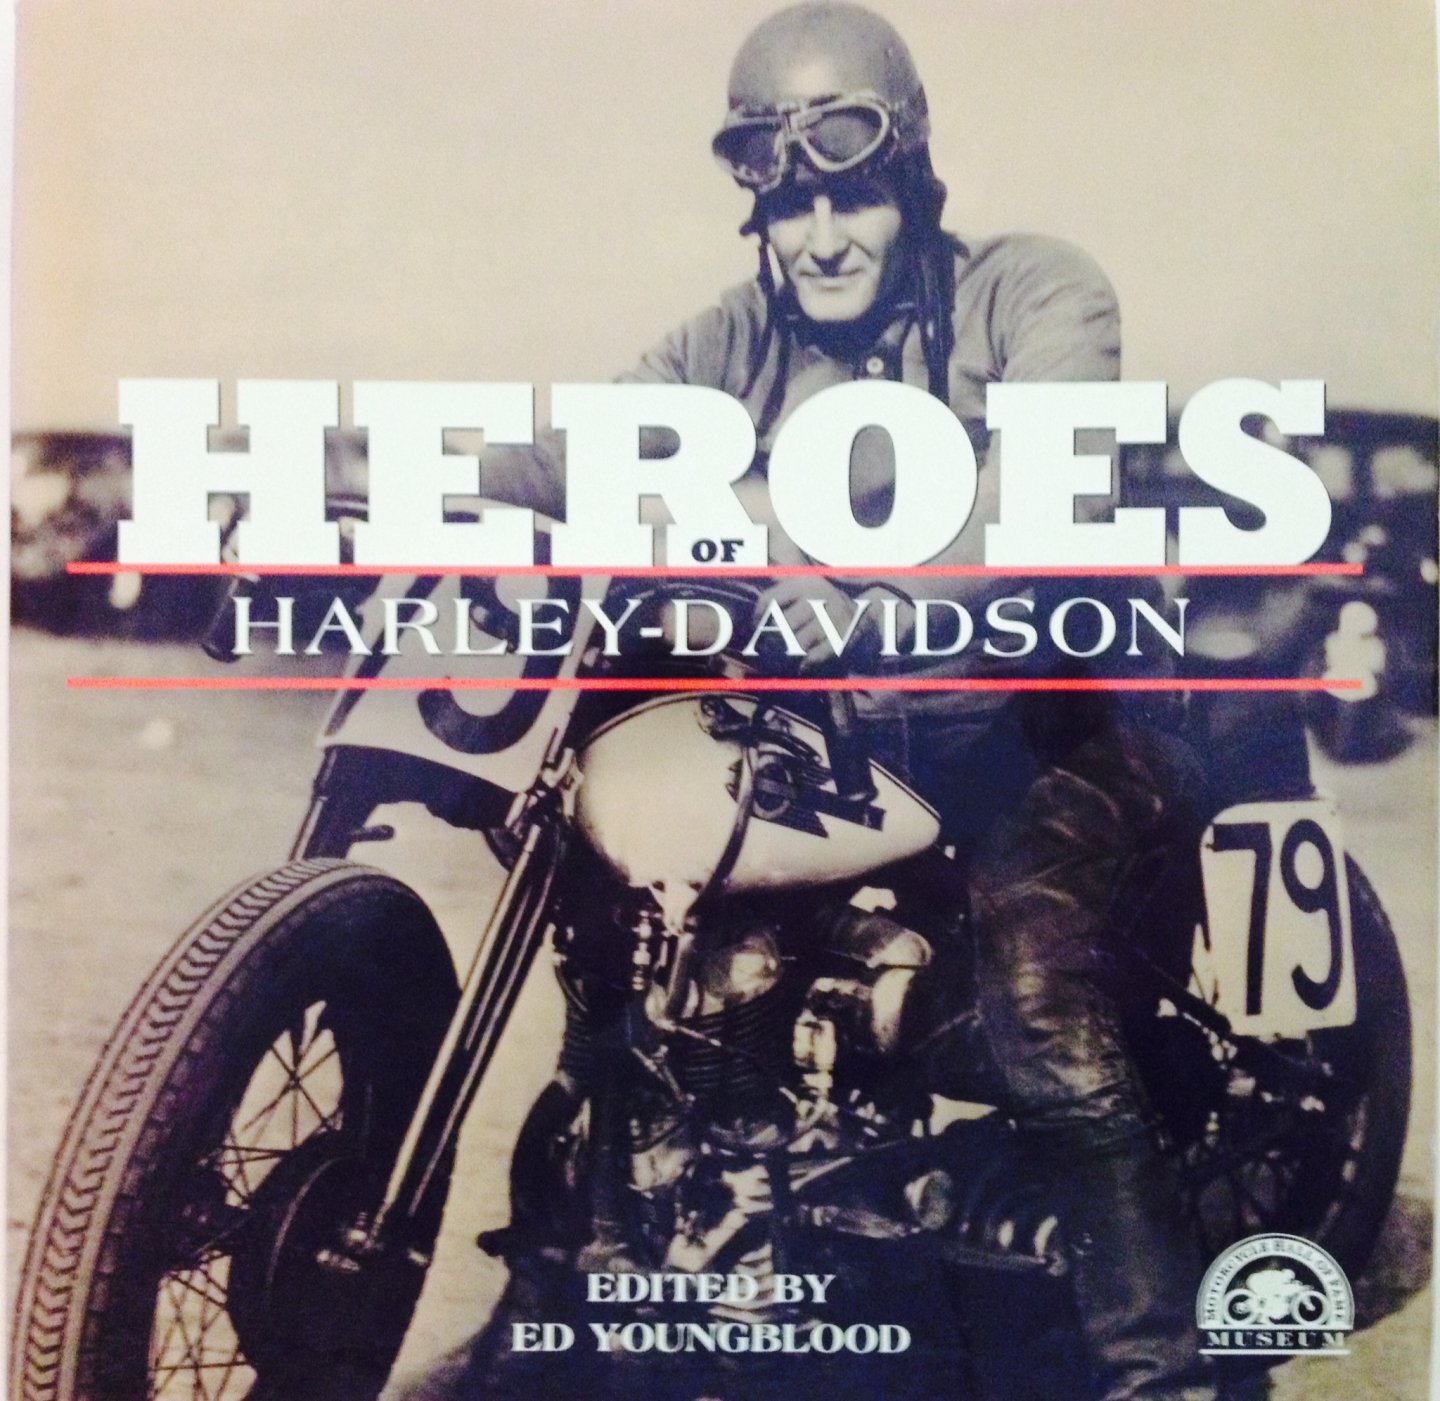 Youngblood, Ed. (ed.) - Heroes of Harley-Davidson. Motorcycle Hall of Fame Museum.